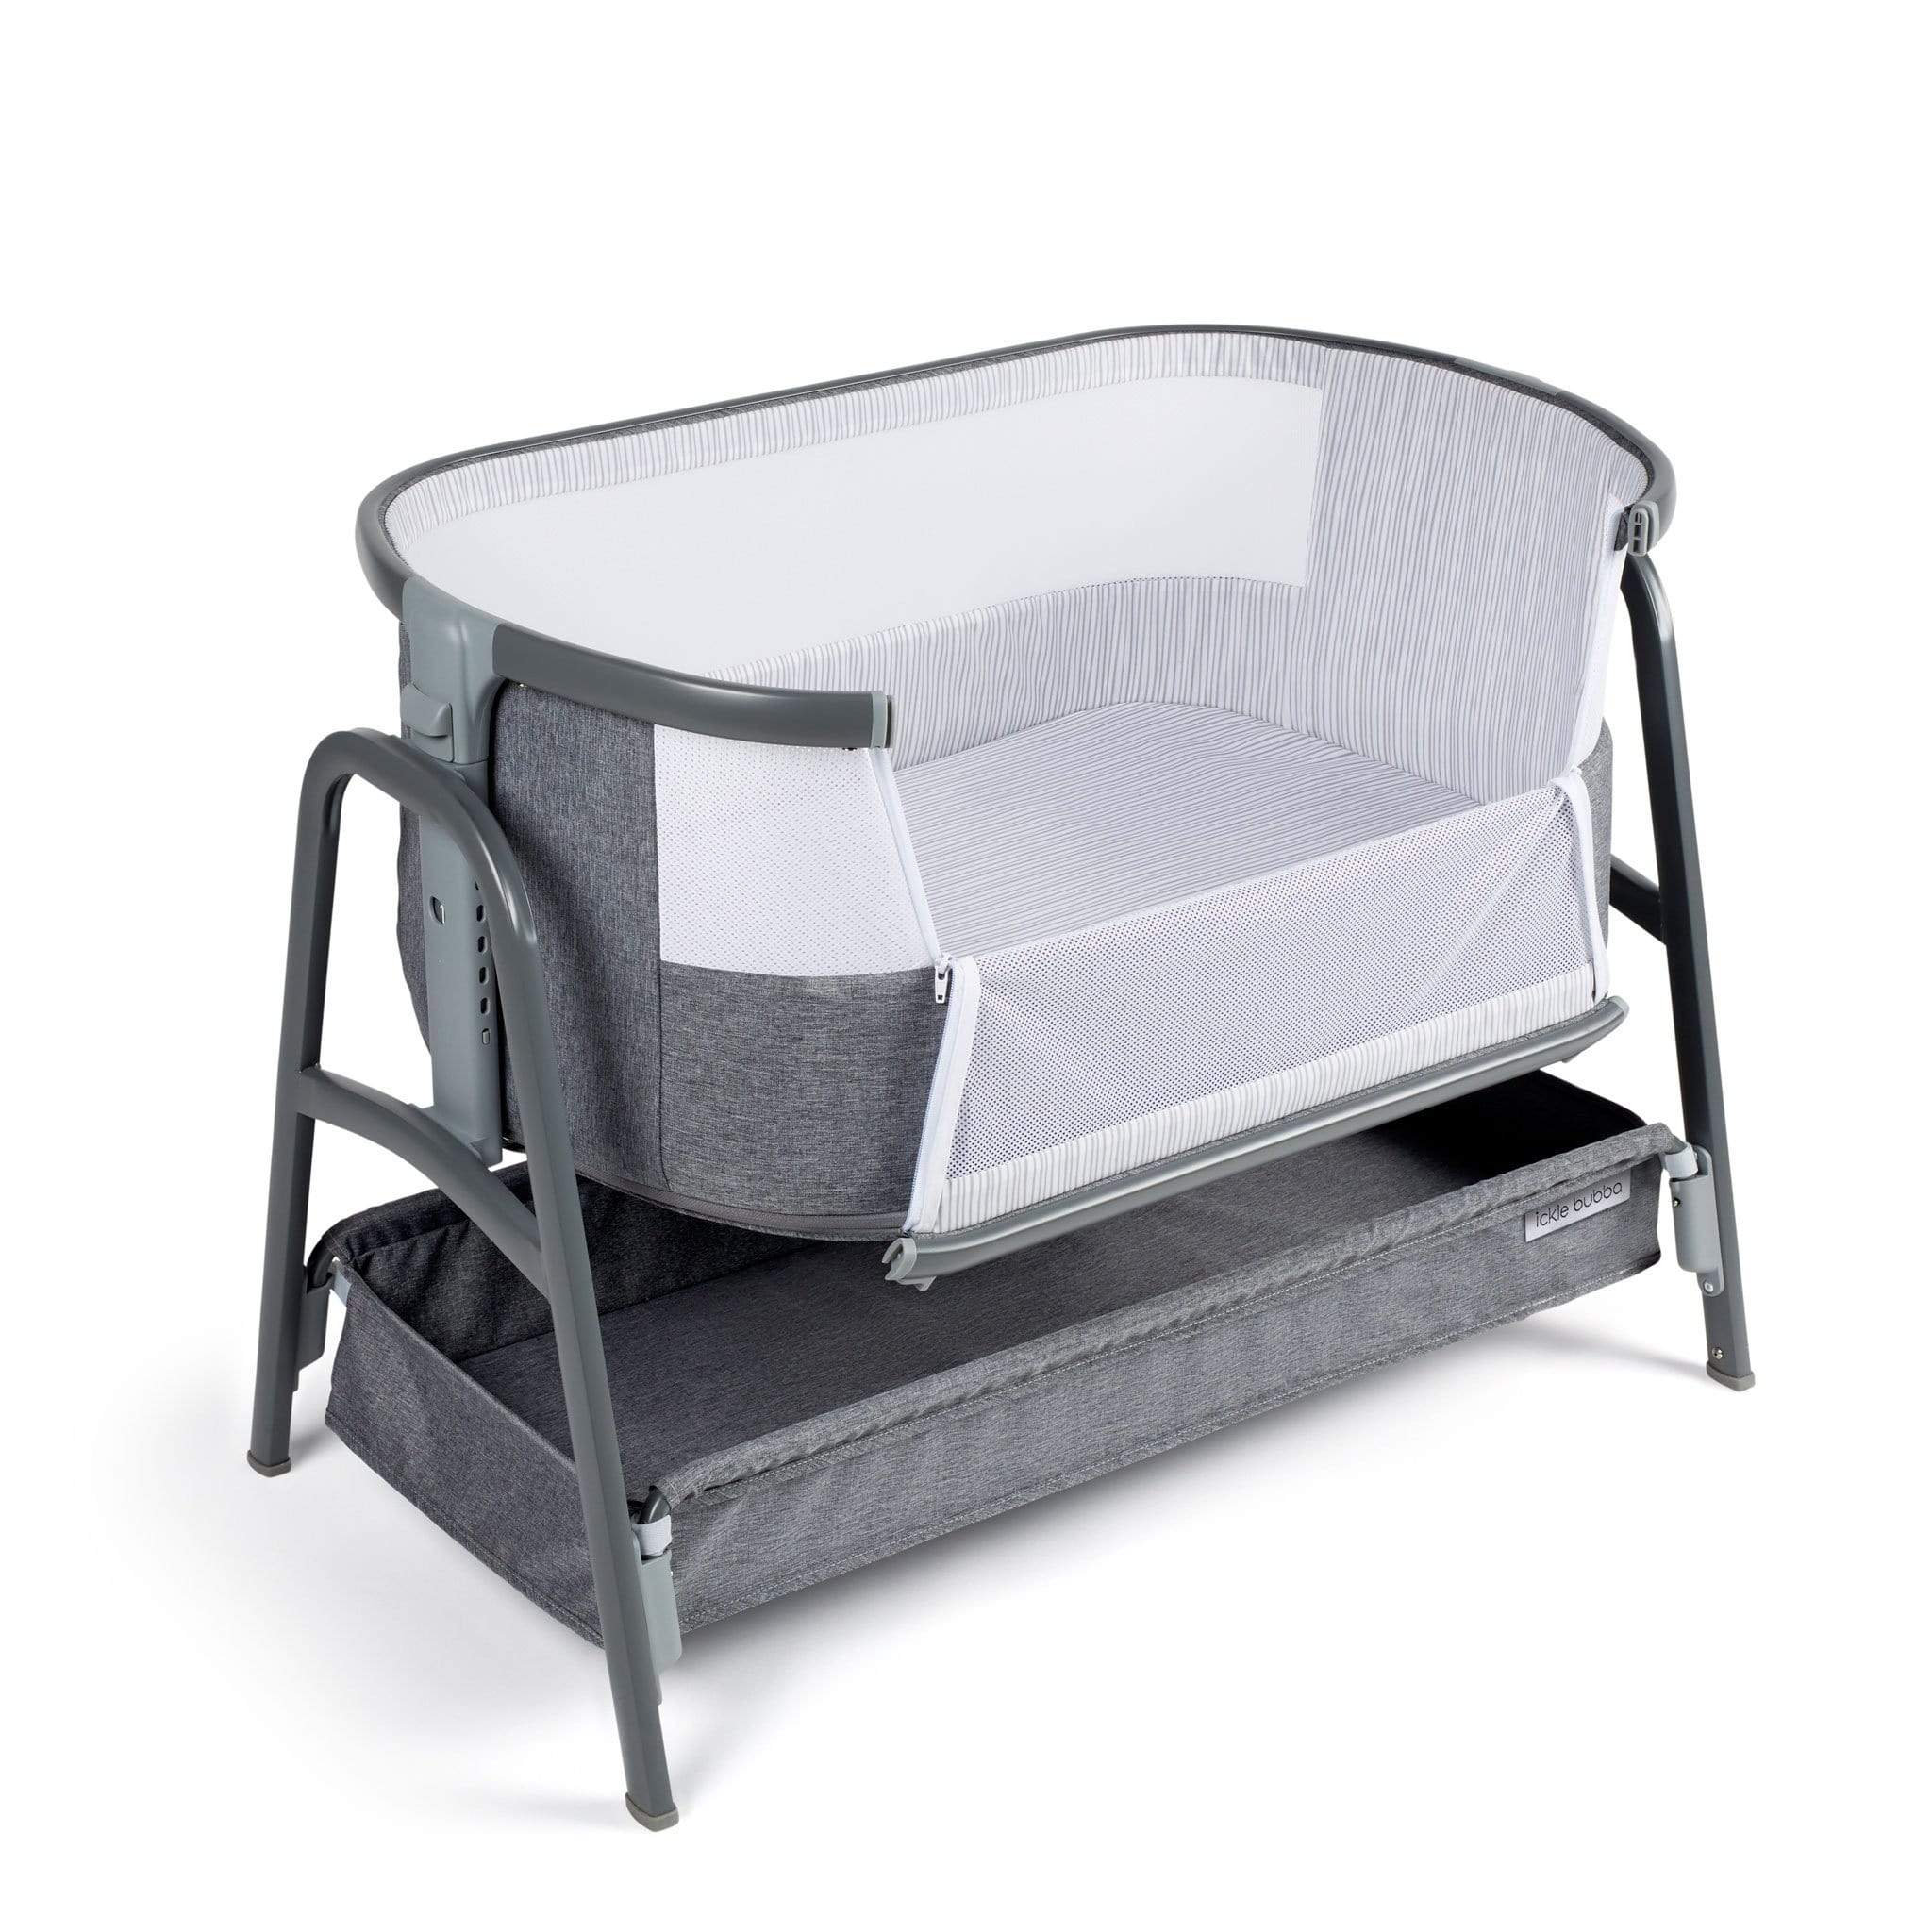 Ickle Bubba Bubba&Me Bedside Crib Space Grey Moses Baskets & Stands 40-001-000-860 5060738076284